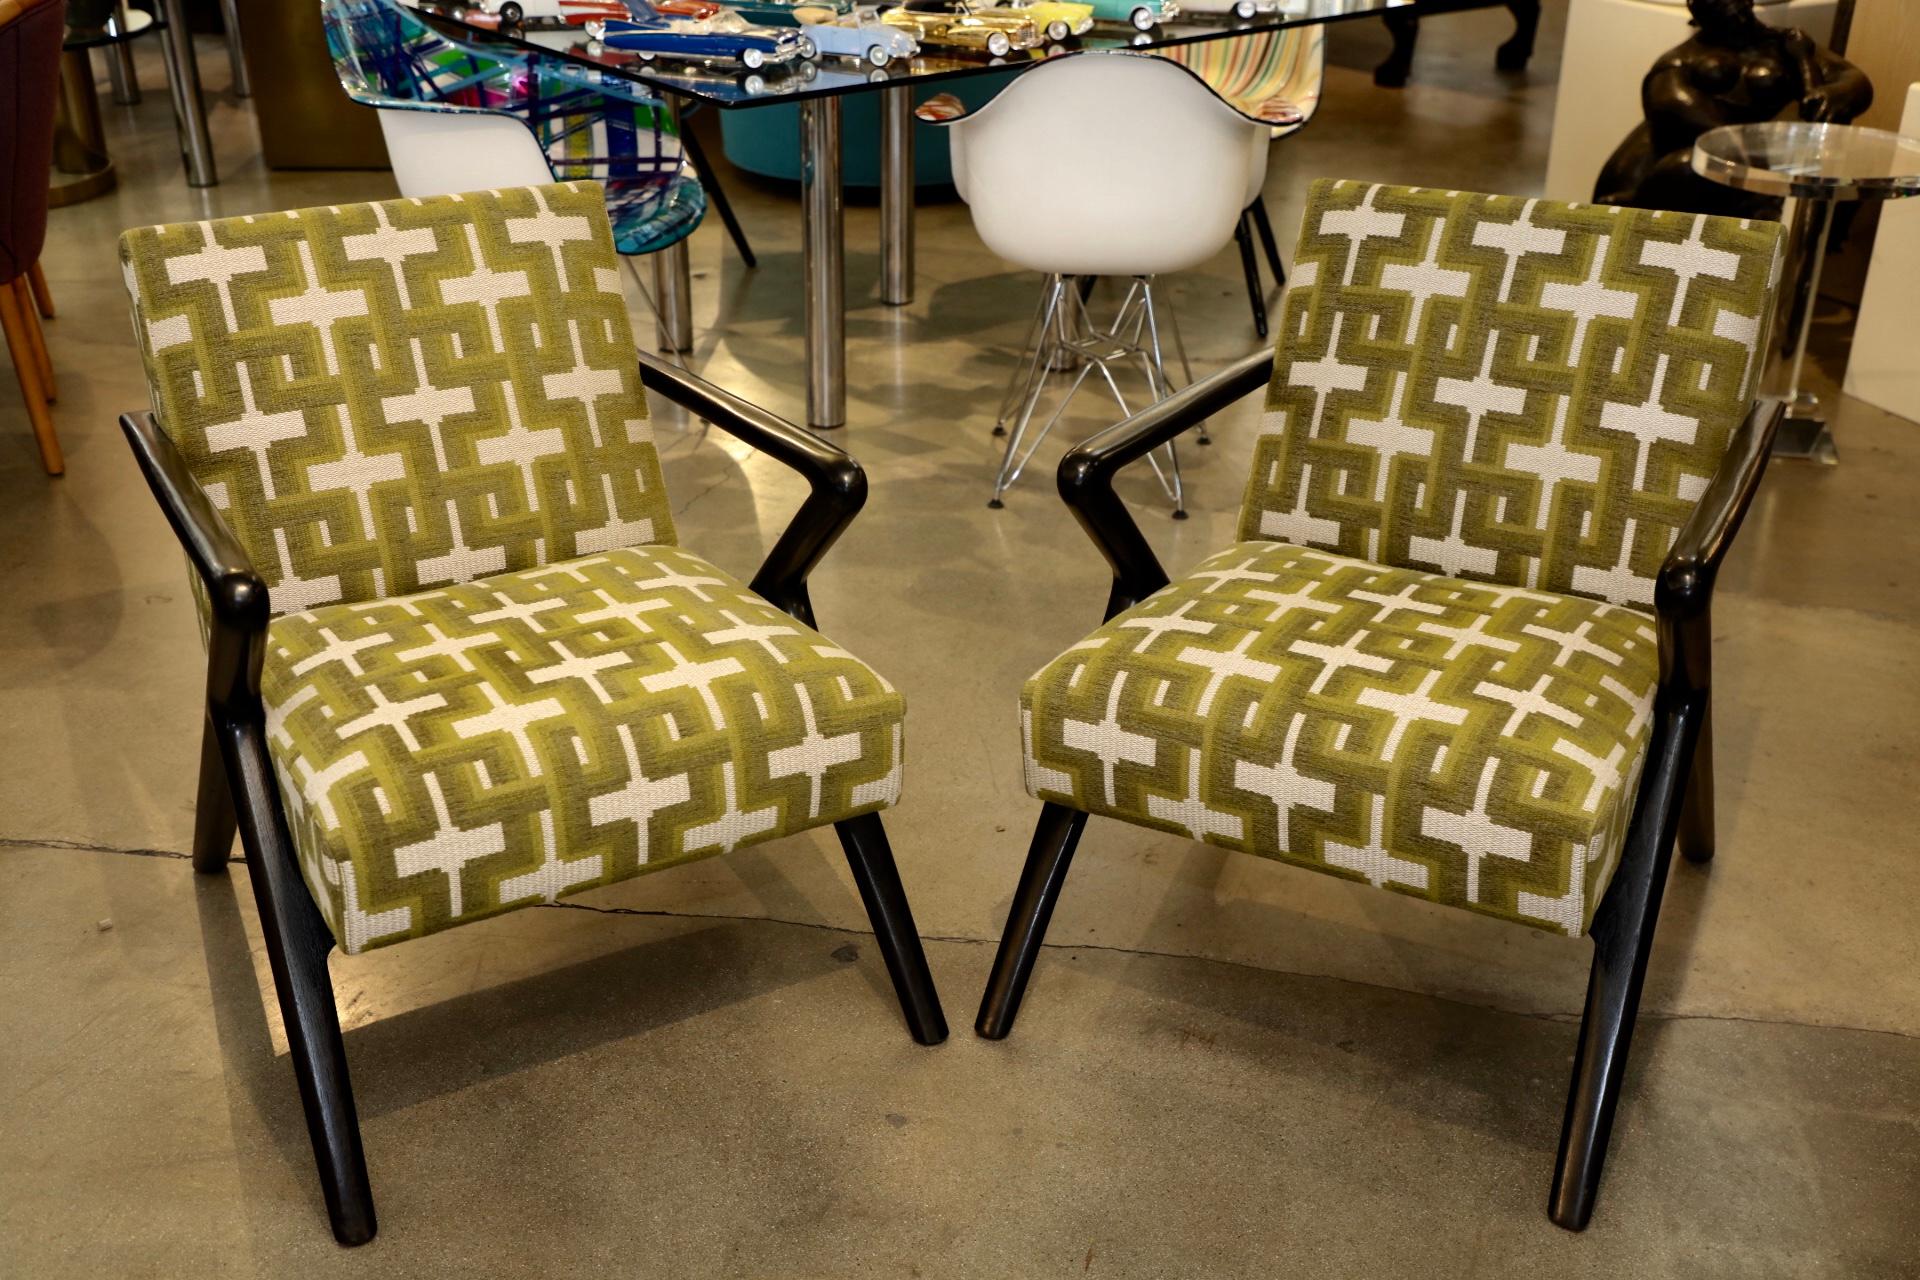 A nice pair of holly hunt Capri chairs with a patterned fabric. They are labelled. In very good condition with some minor marks and imperfections.